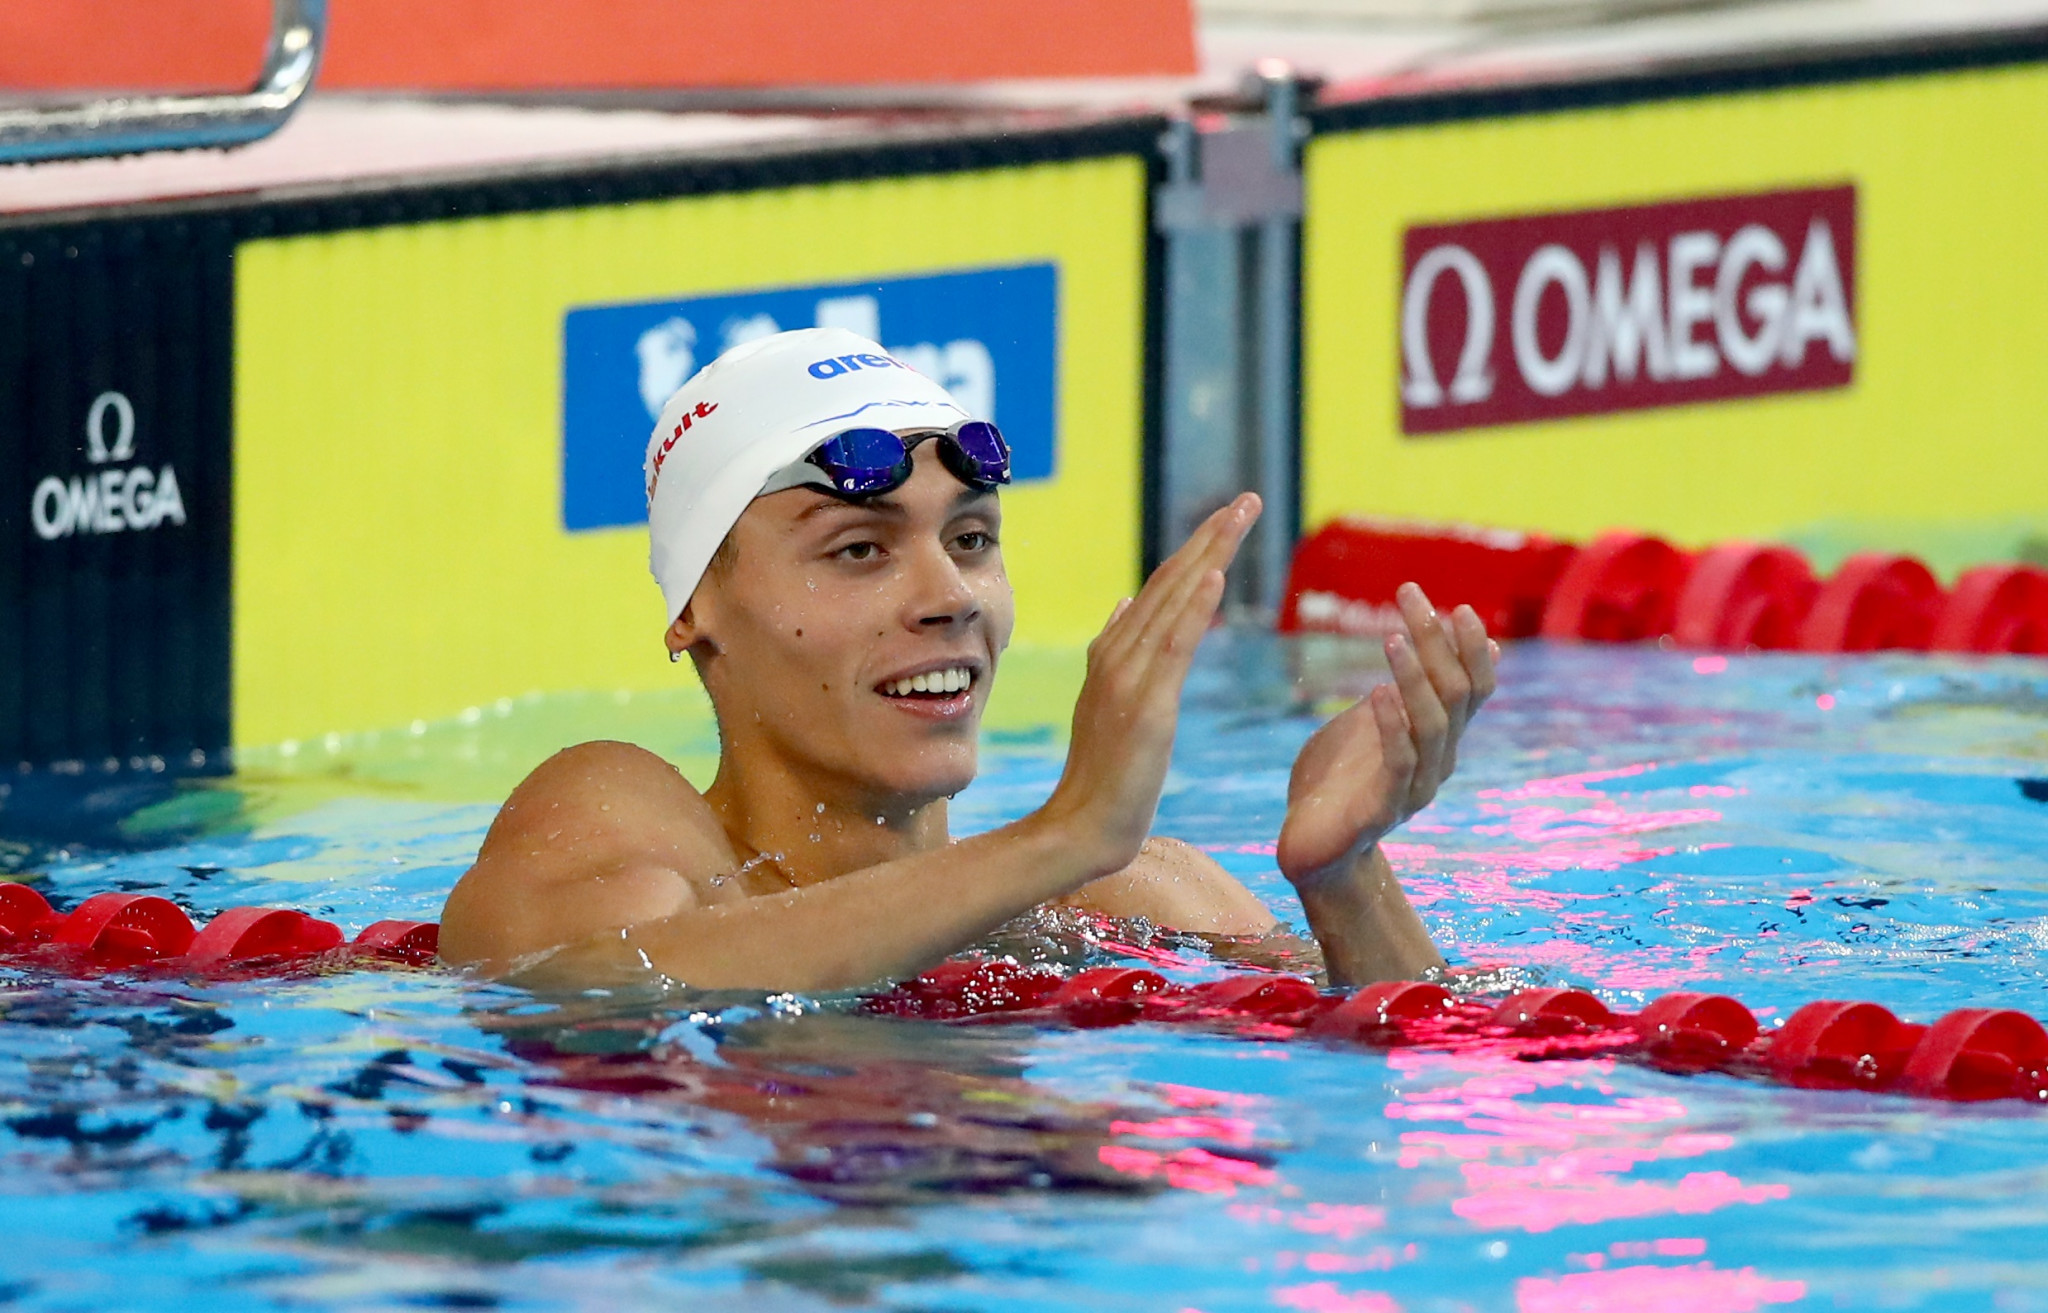 Popovici relishing Chalmers rivalry at World Swimming Championships (25m)